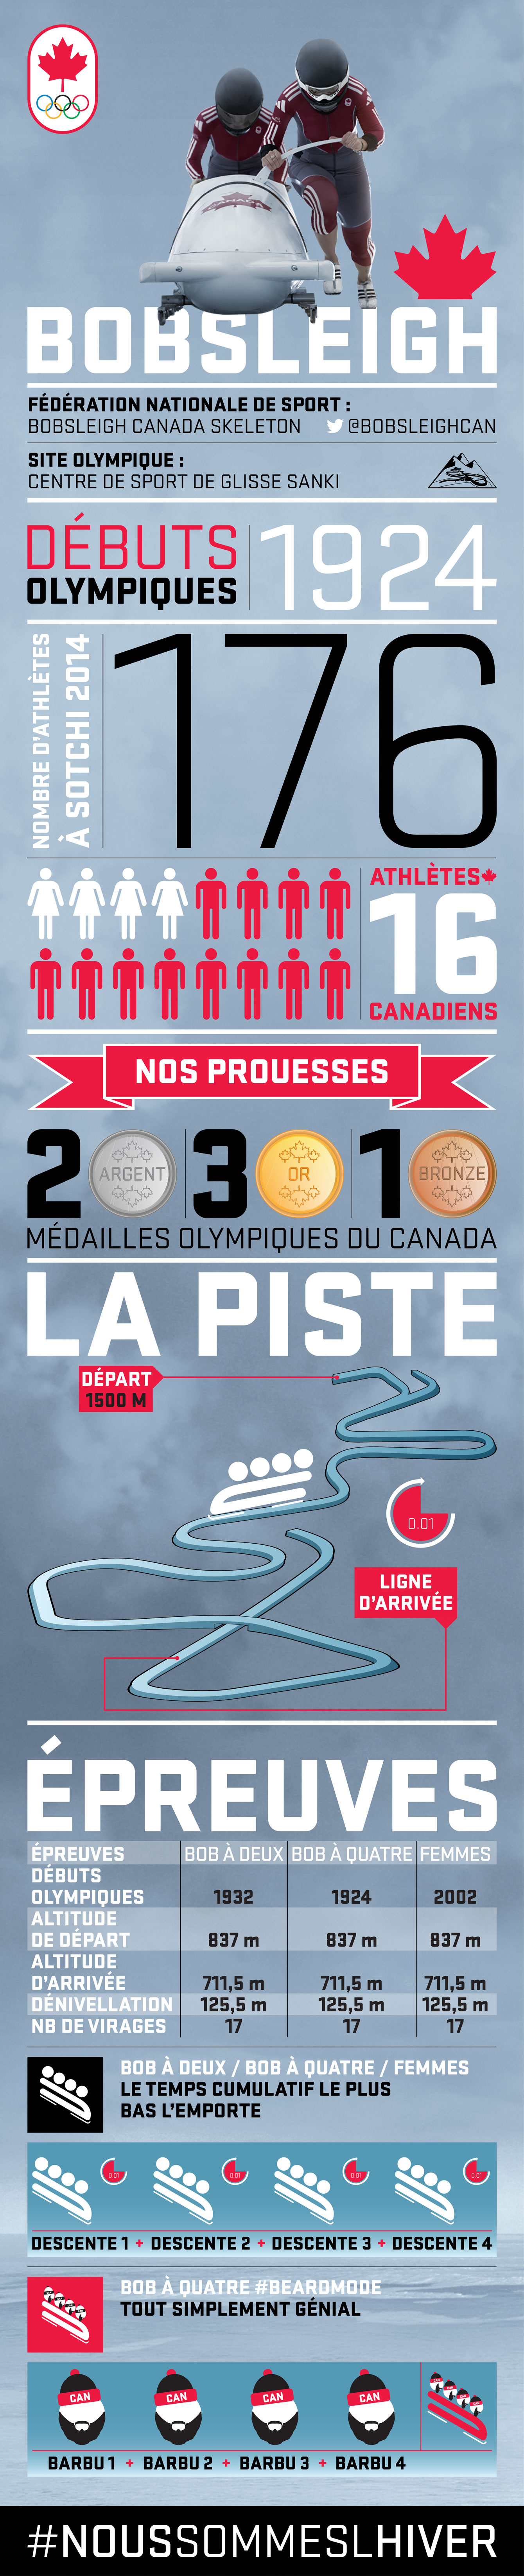 infographic_bobsleigh_FR